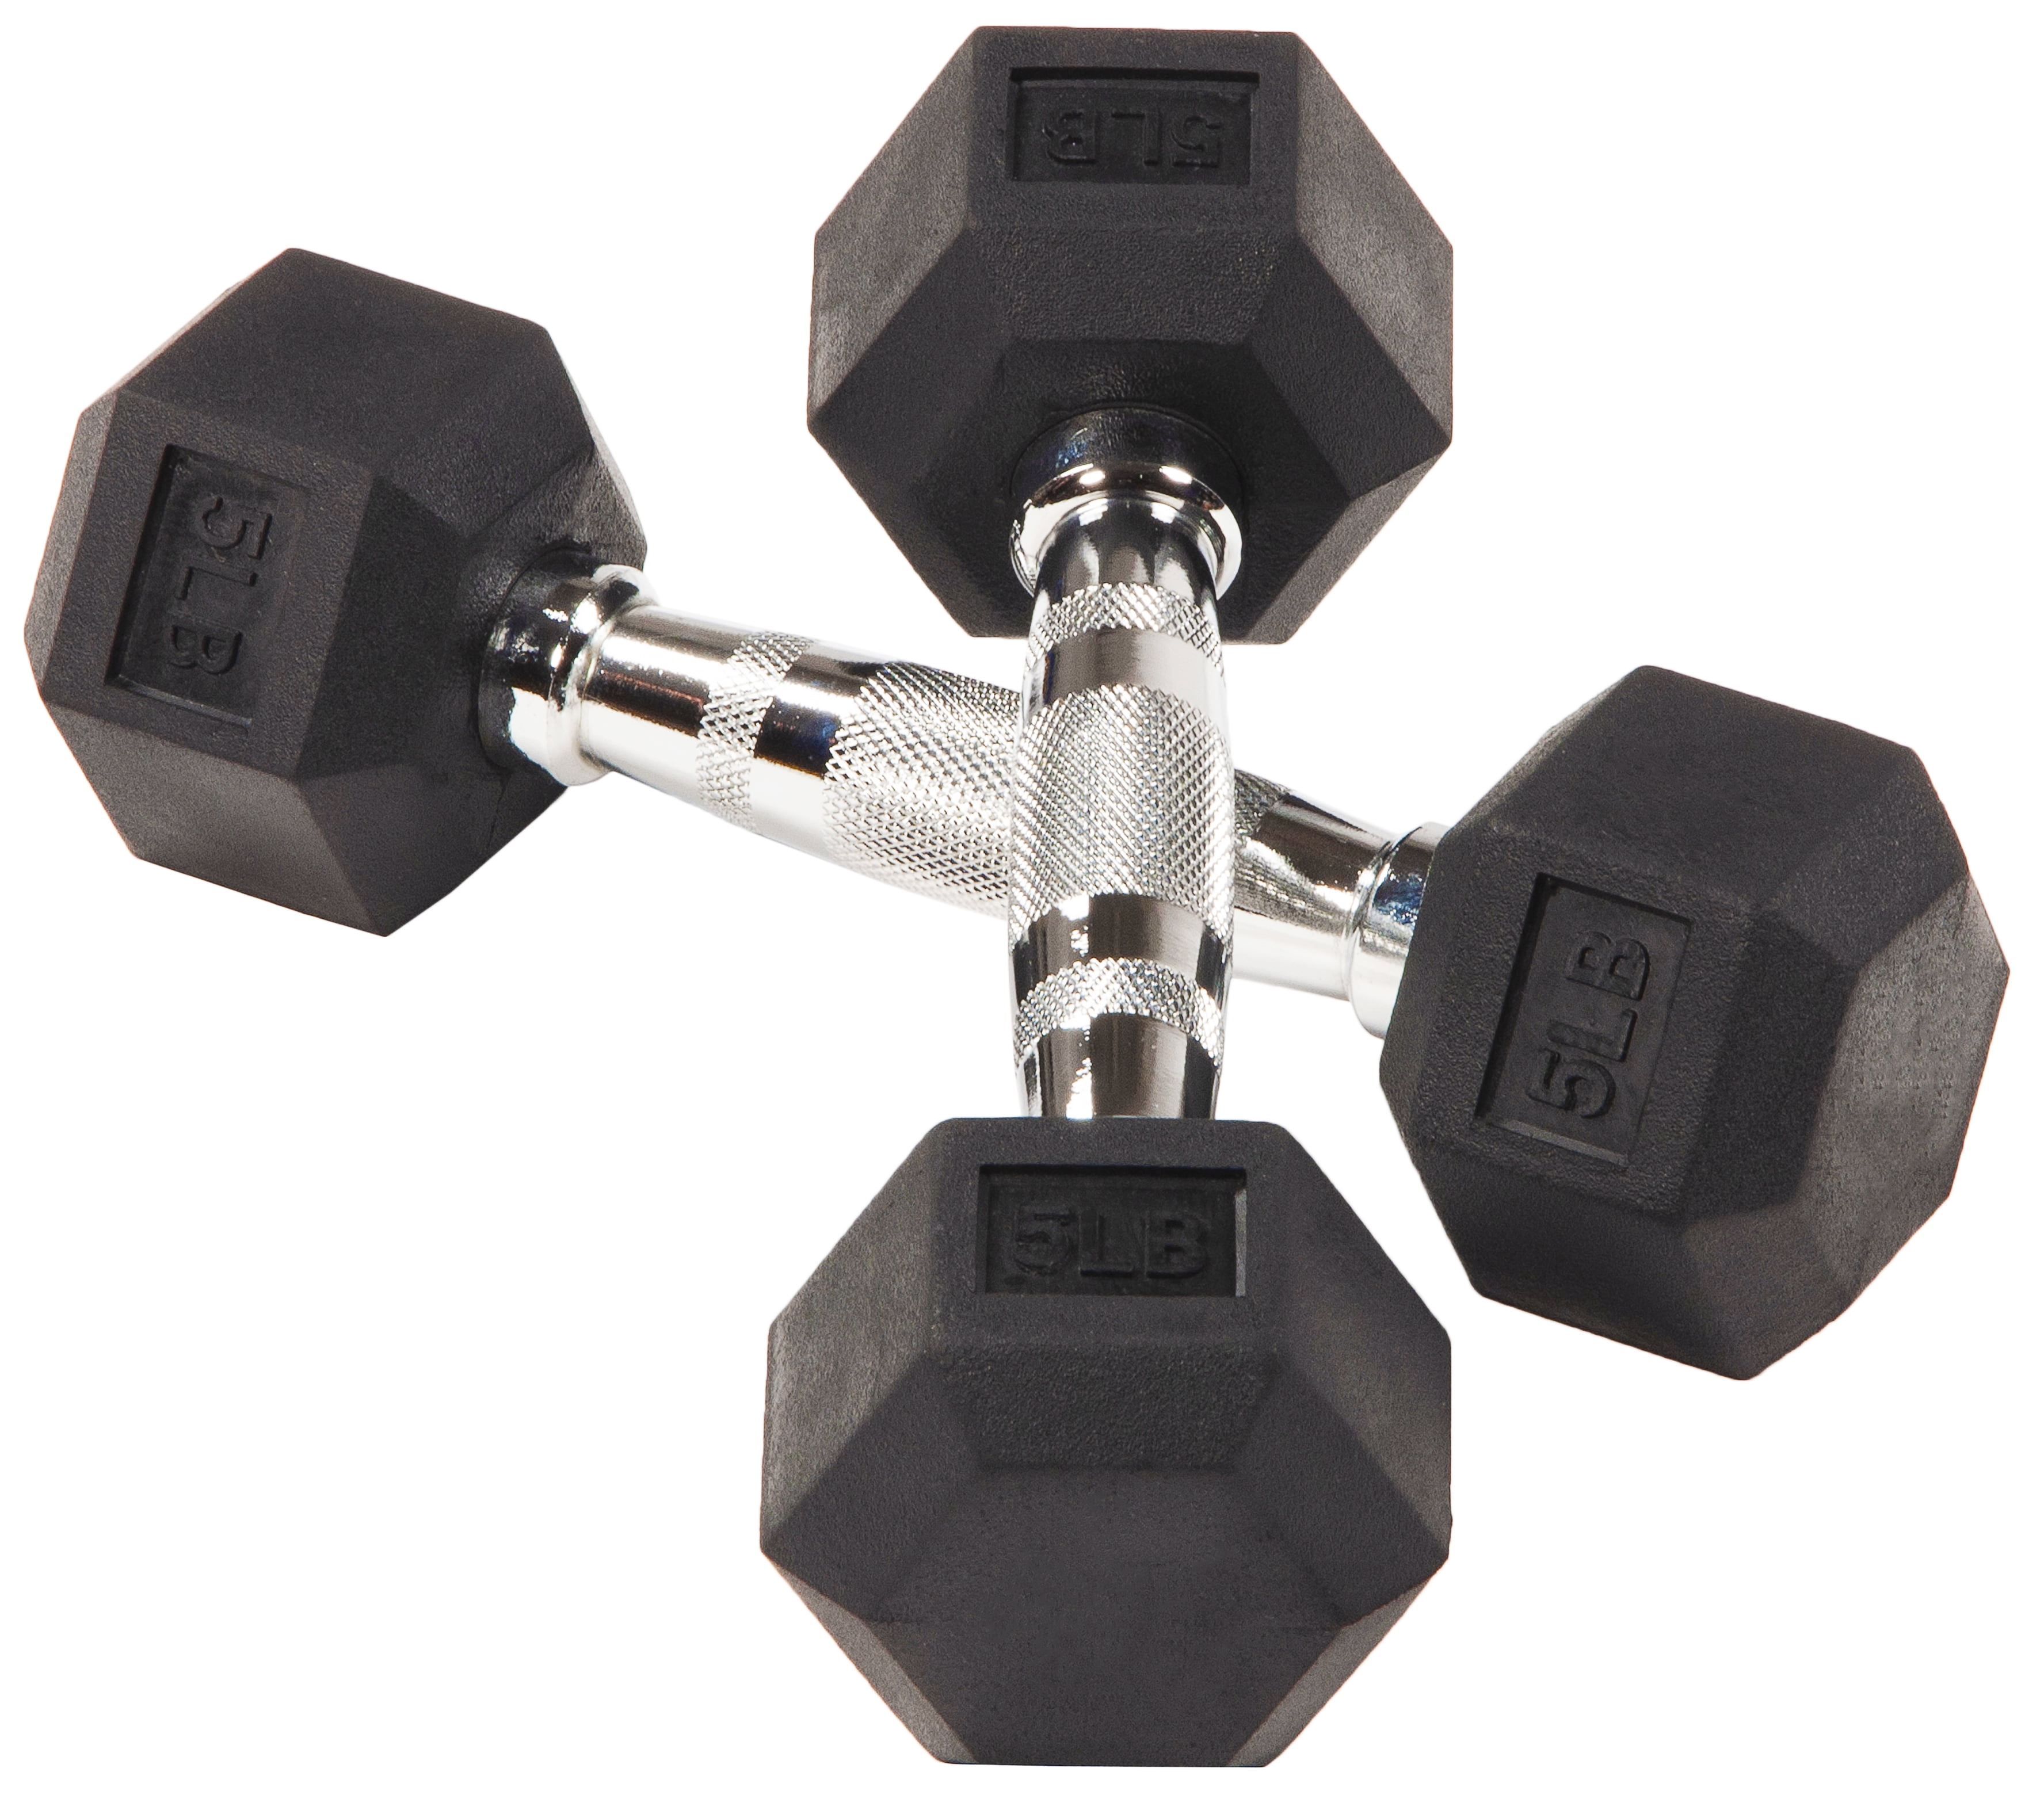 Details about   Pair of Hex Dumbbell Rubber Encased Cast Iron Weights Set Women Home Gym Workout 